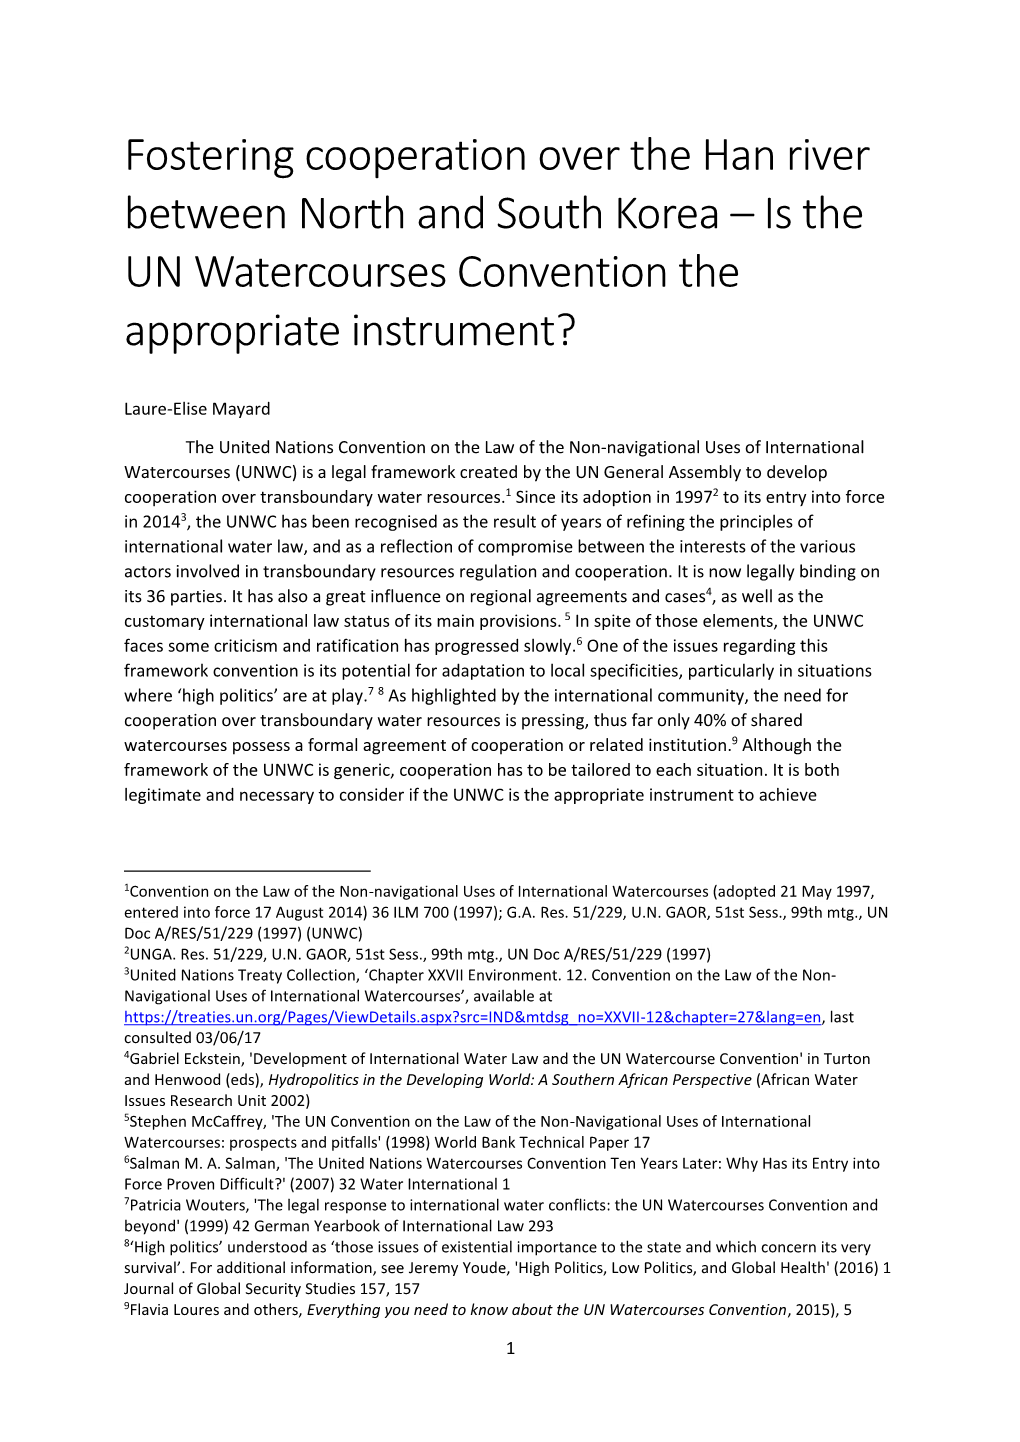 Fostering Cooperation Over the Han River Between North and South Korea – Is the UN Watercourses Convention the Appropriate Instrument?